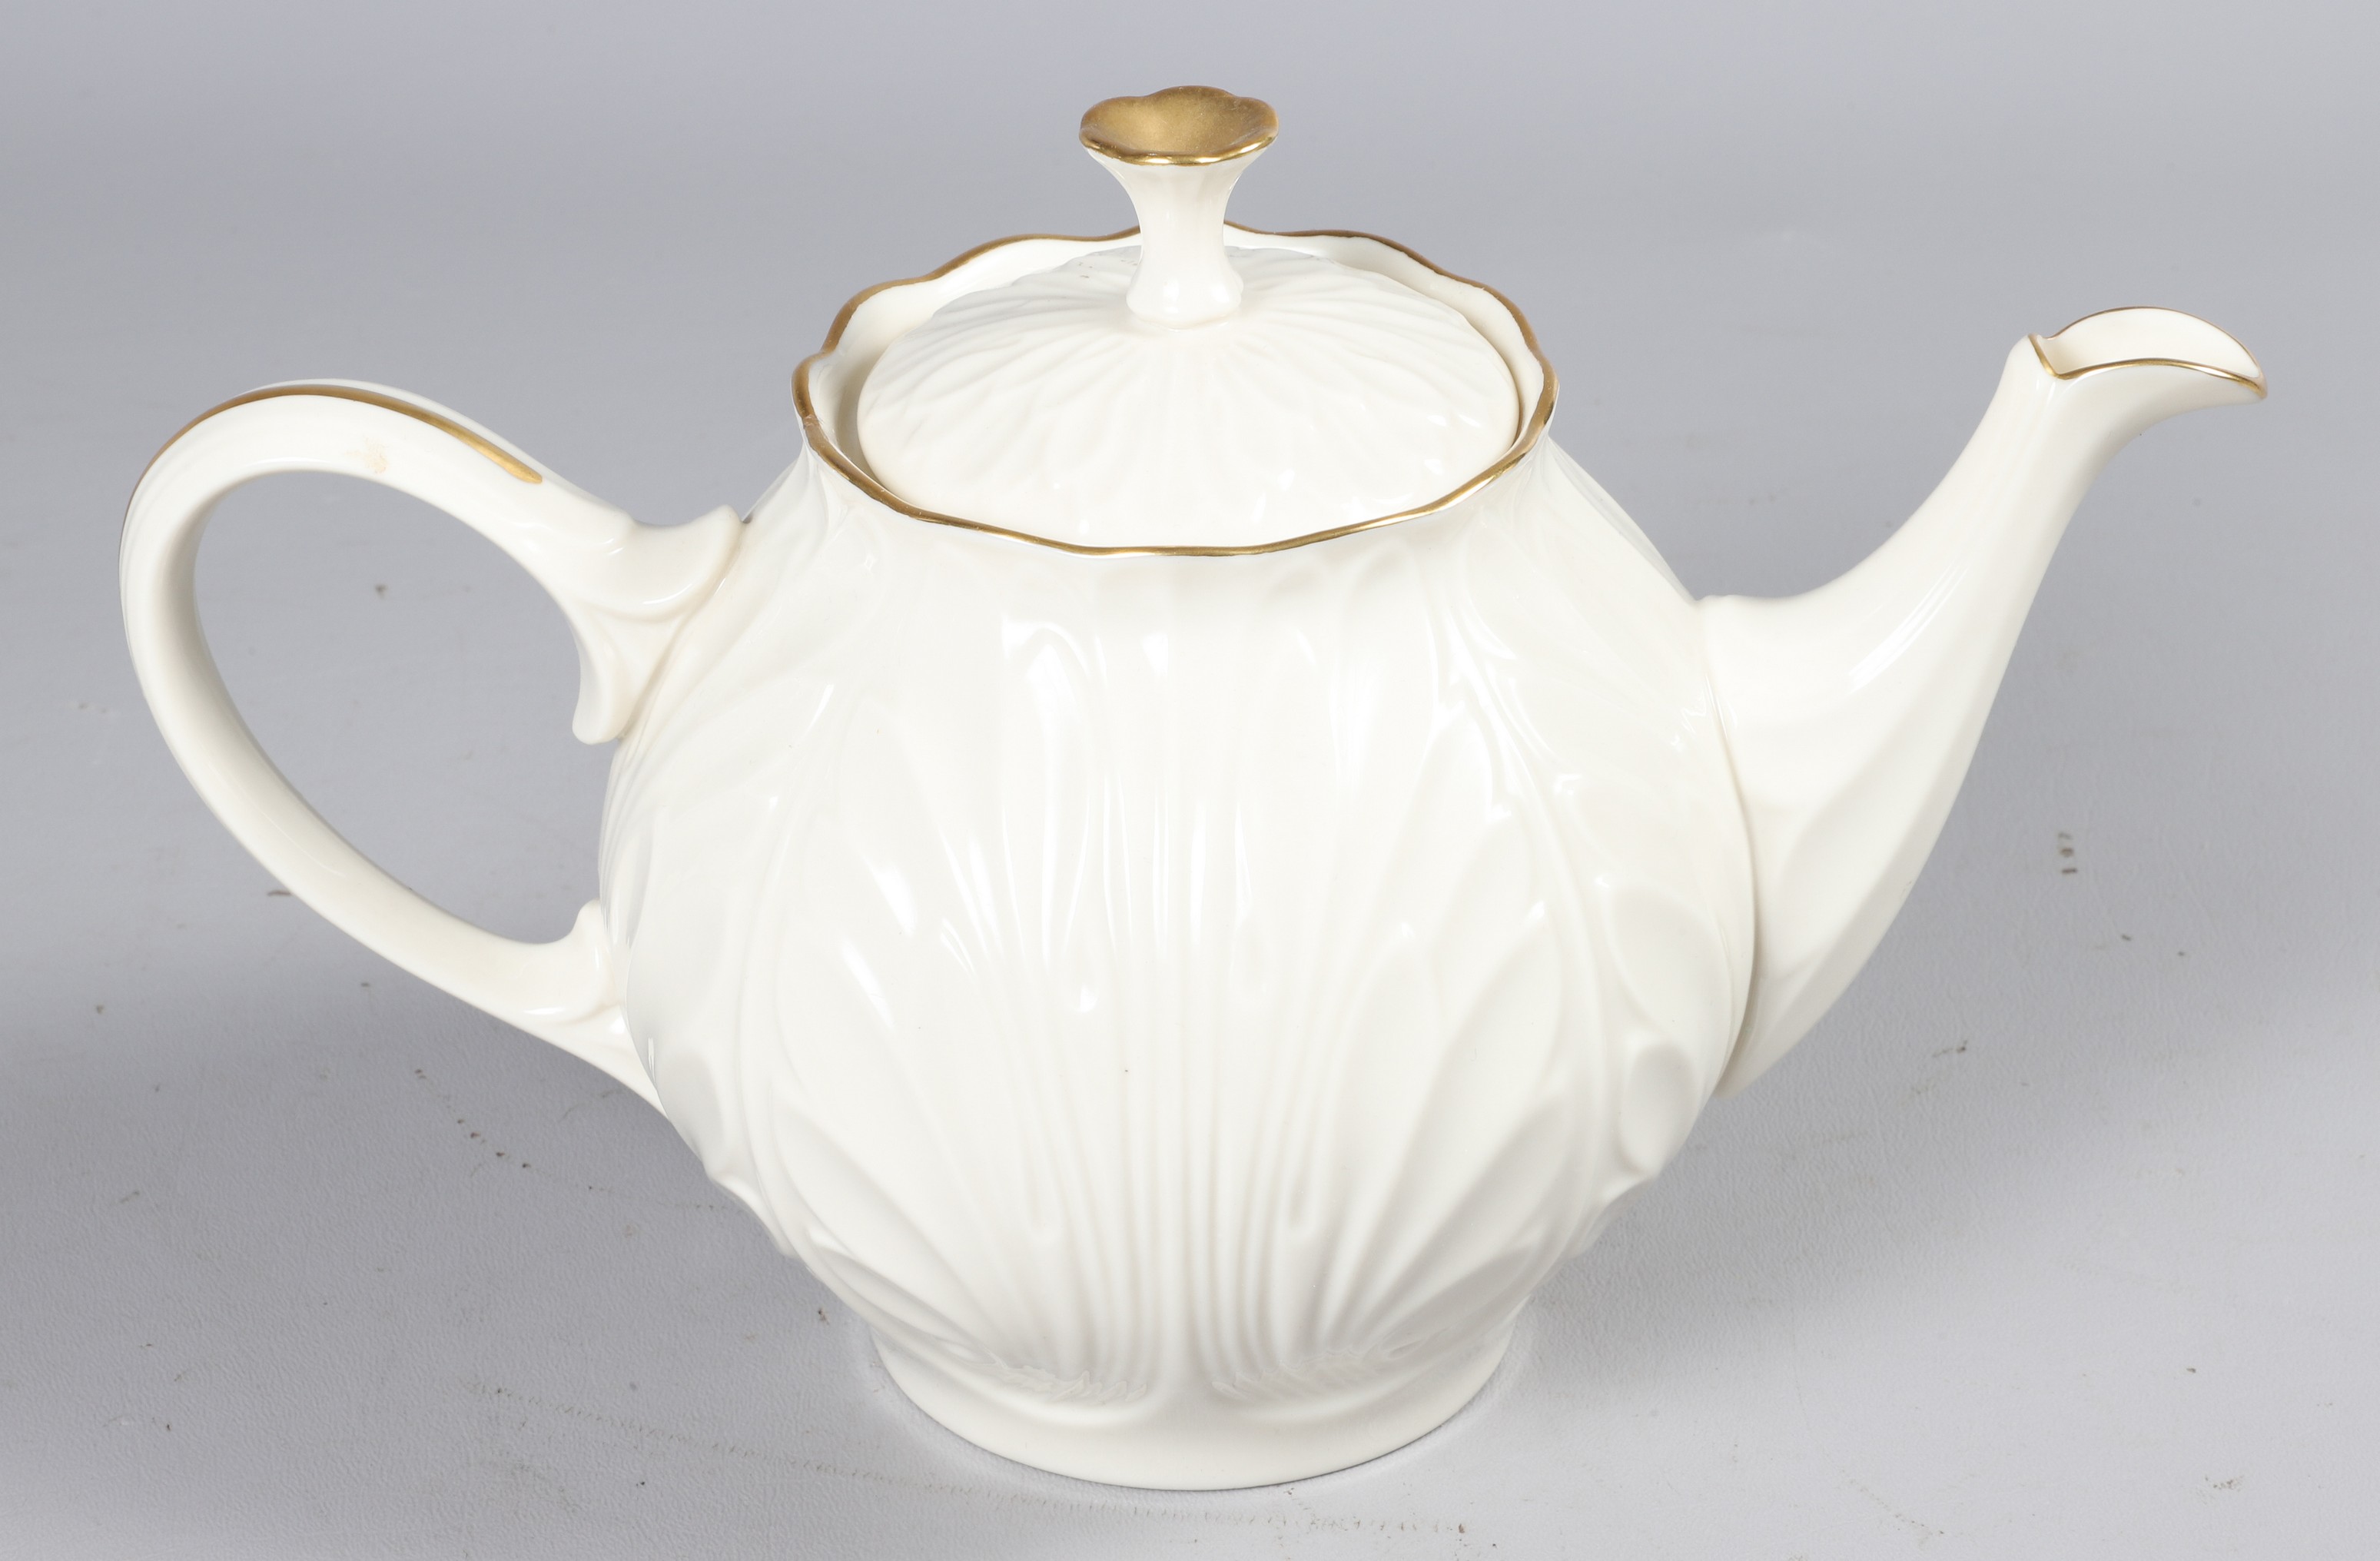 Lenox Cottage Collection teapot, embossed